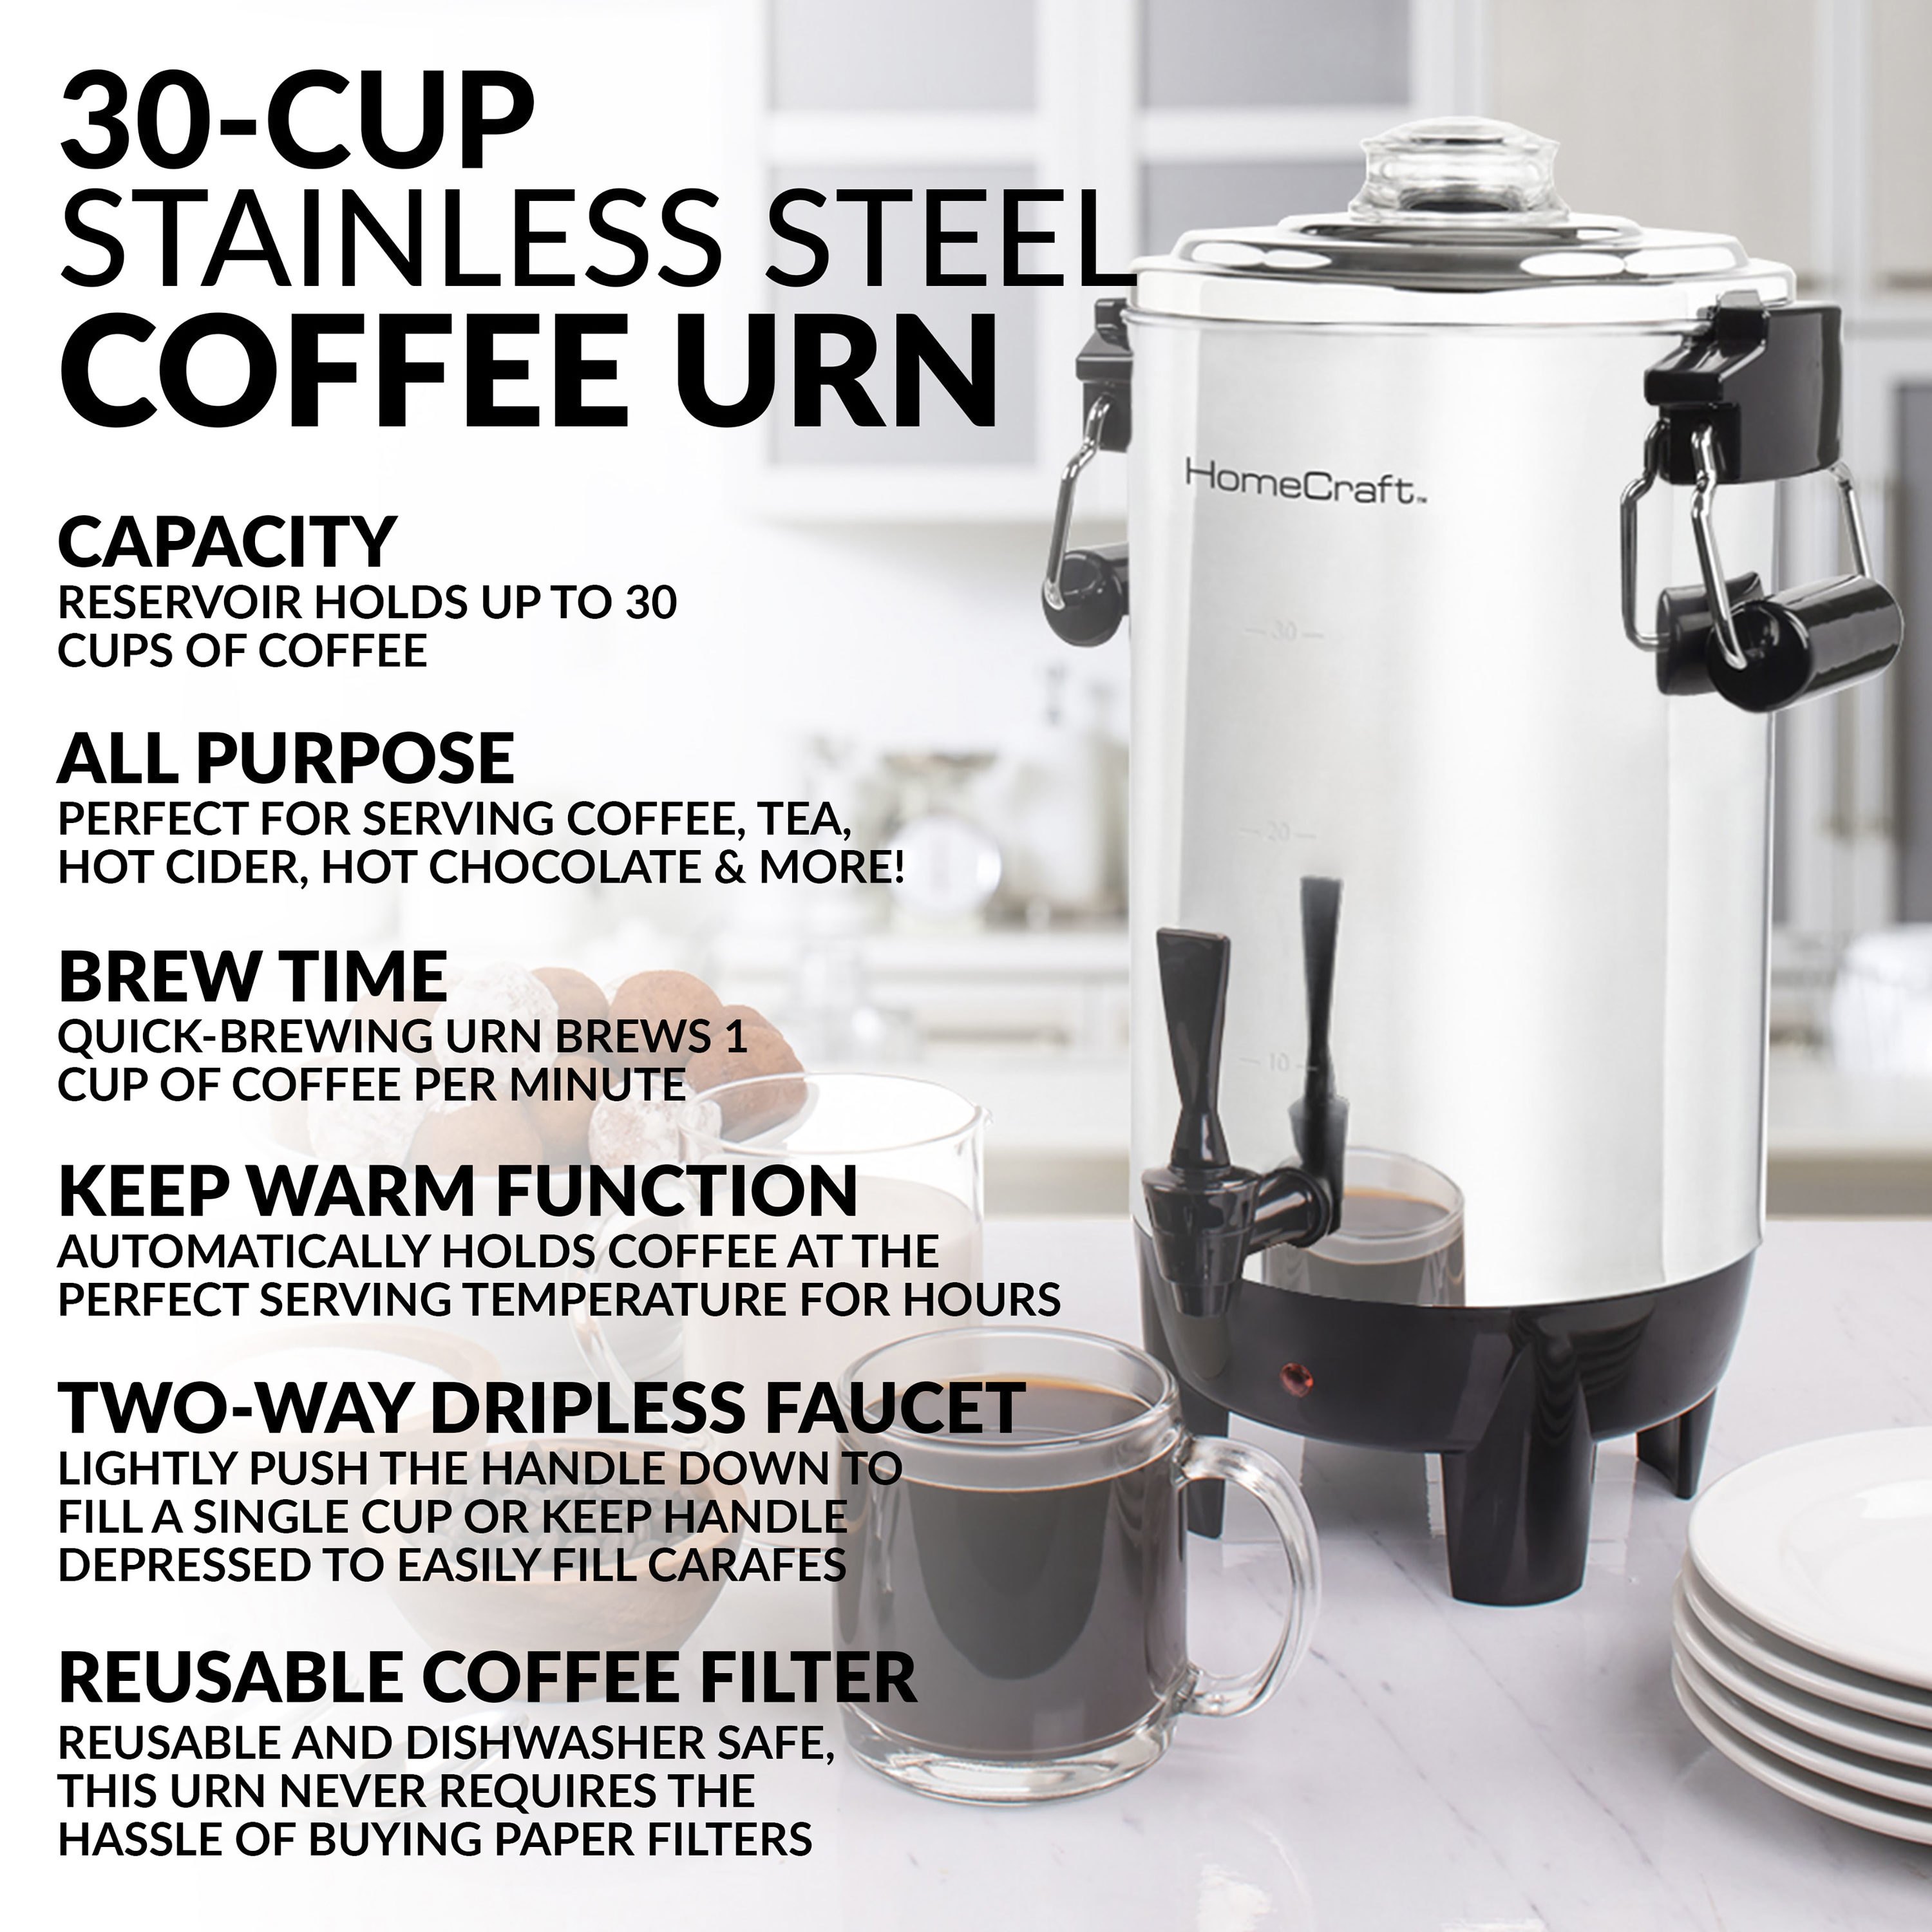 HomeCraft Stainless steel Coffee Makers at